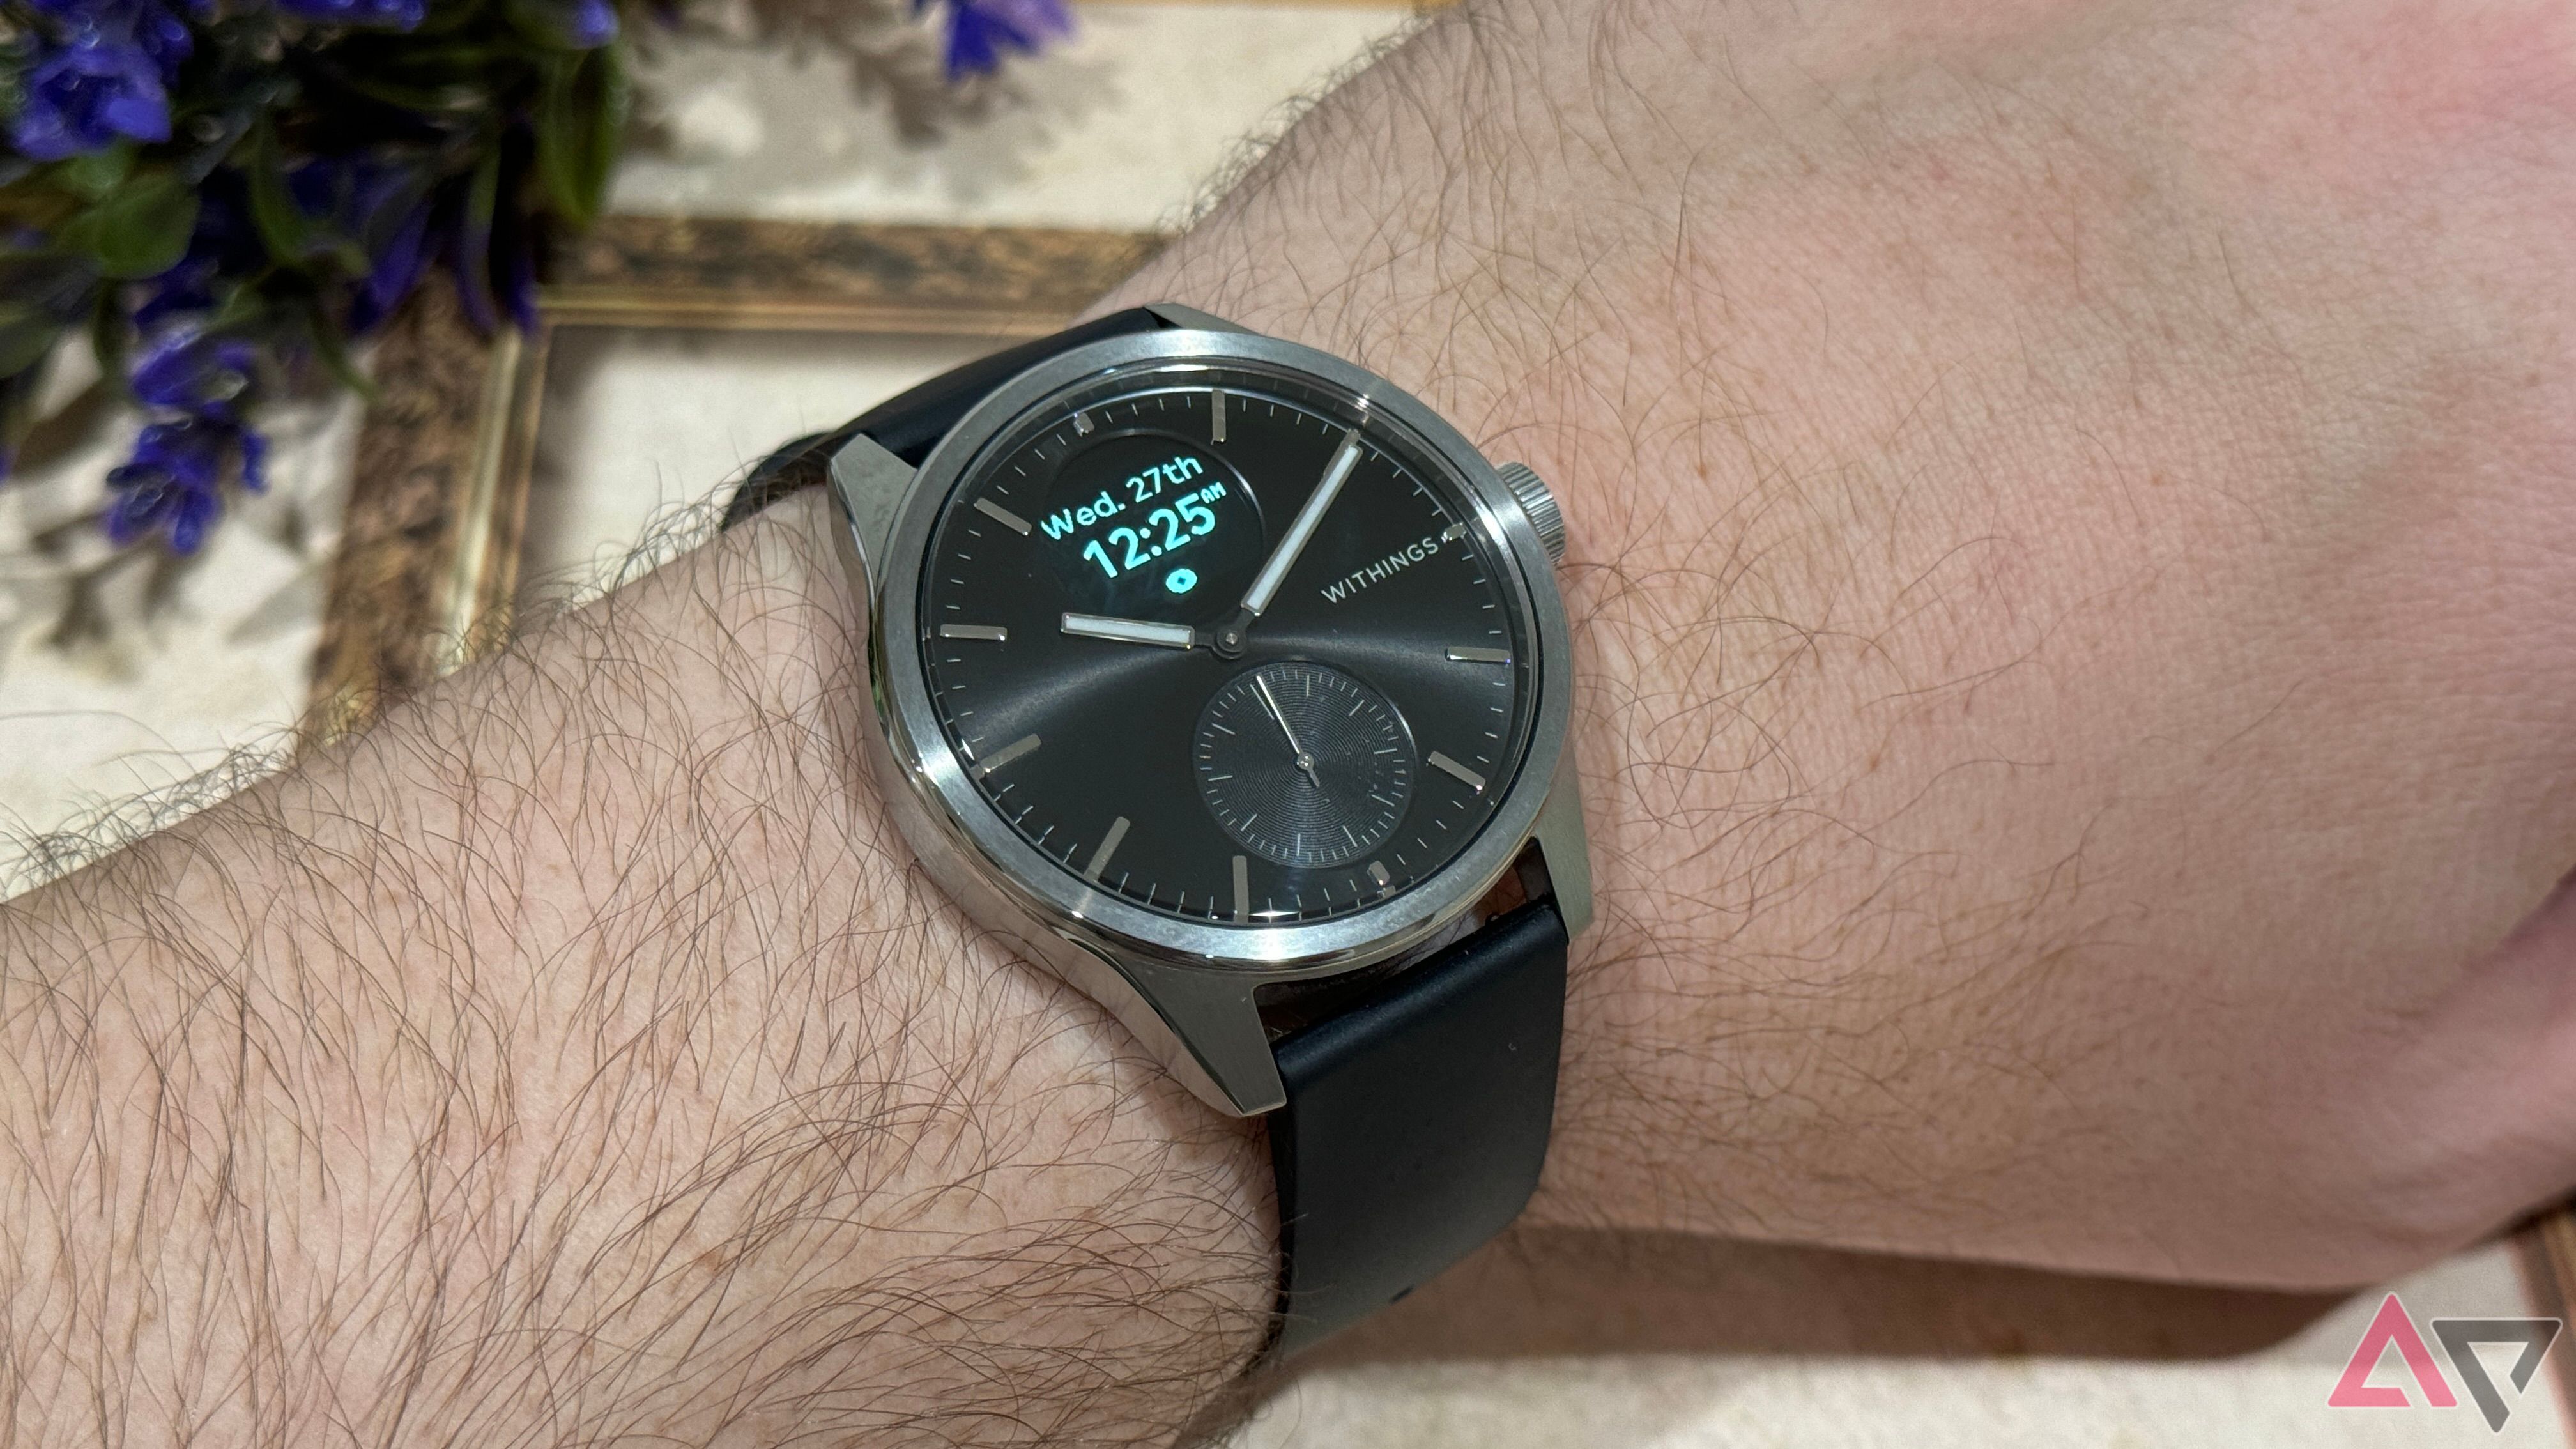 Withings ScanWatch 2 Review: High Hopes, Mixed Results!